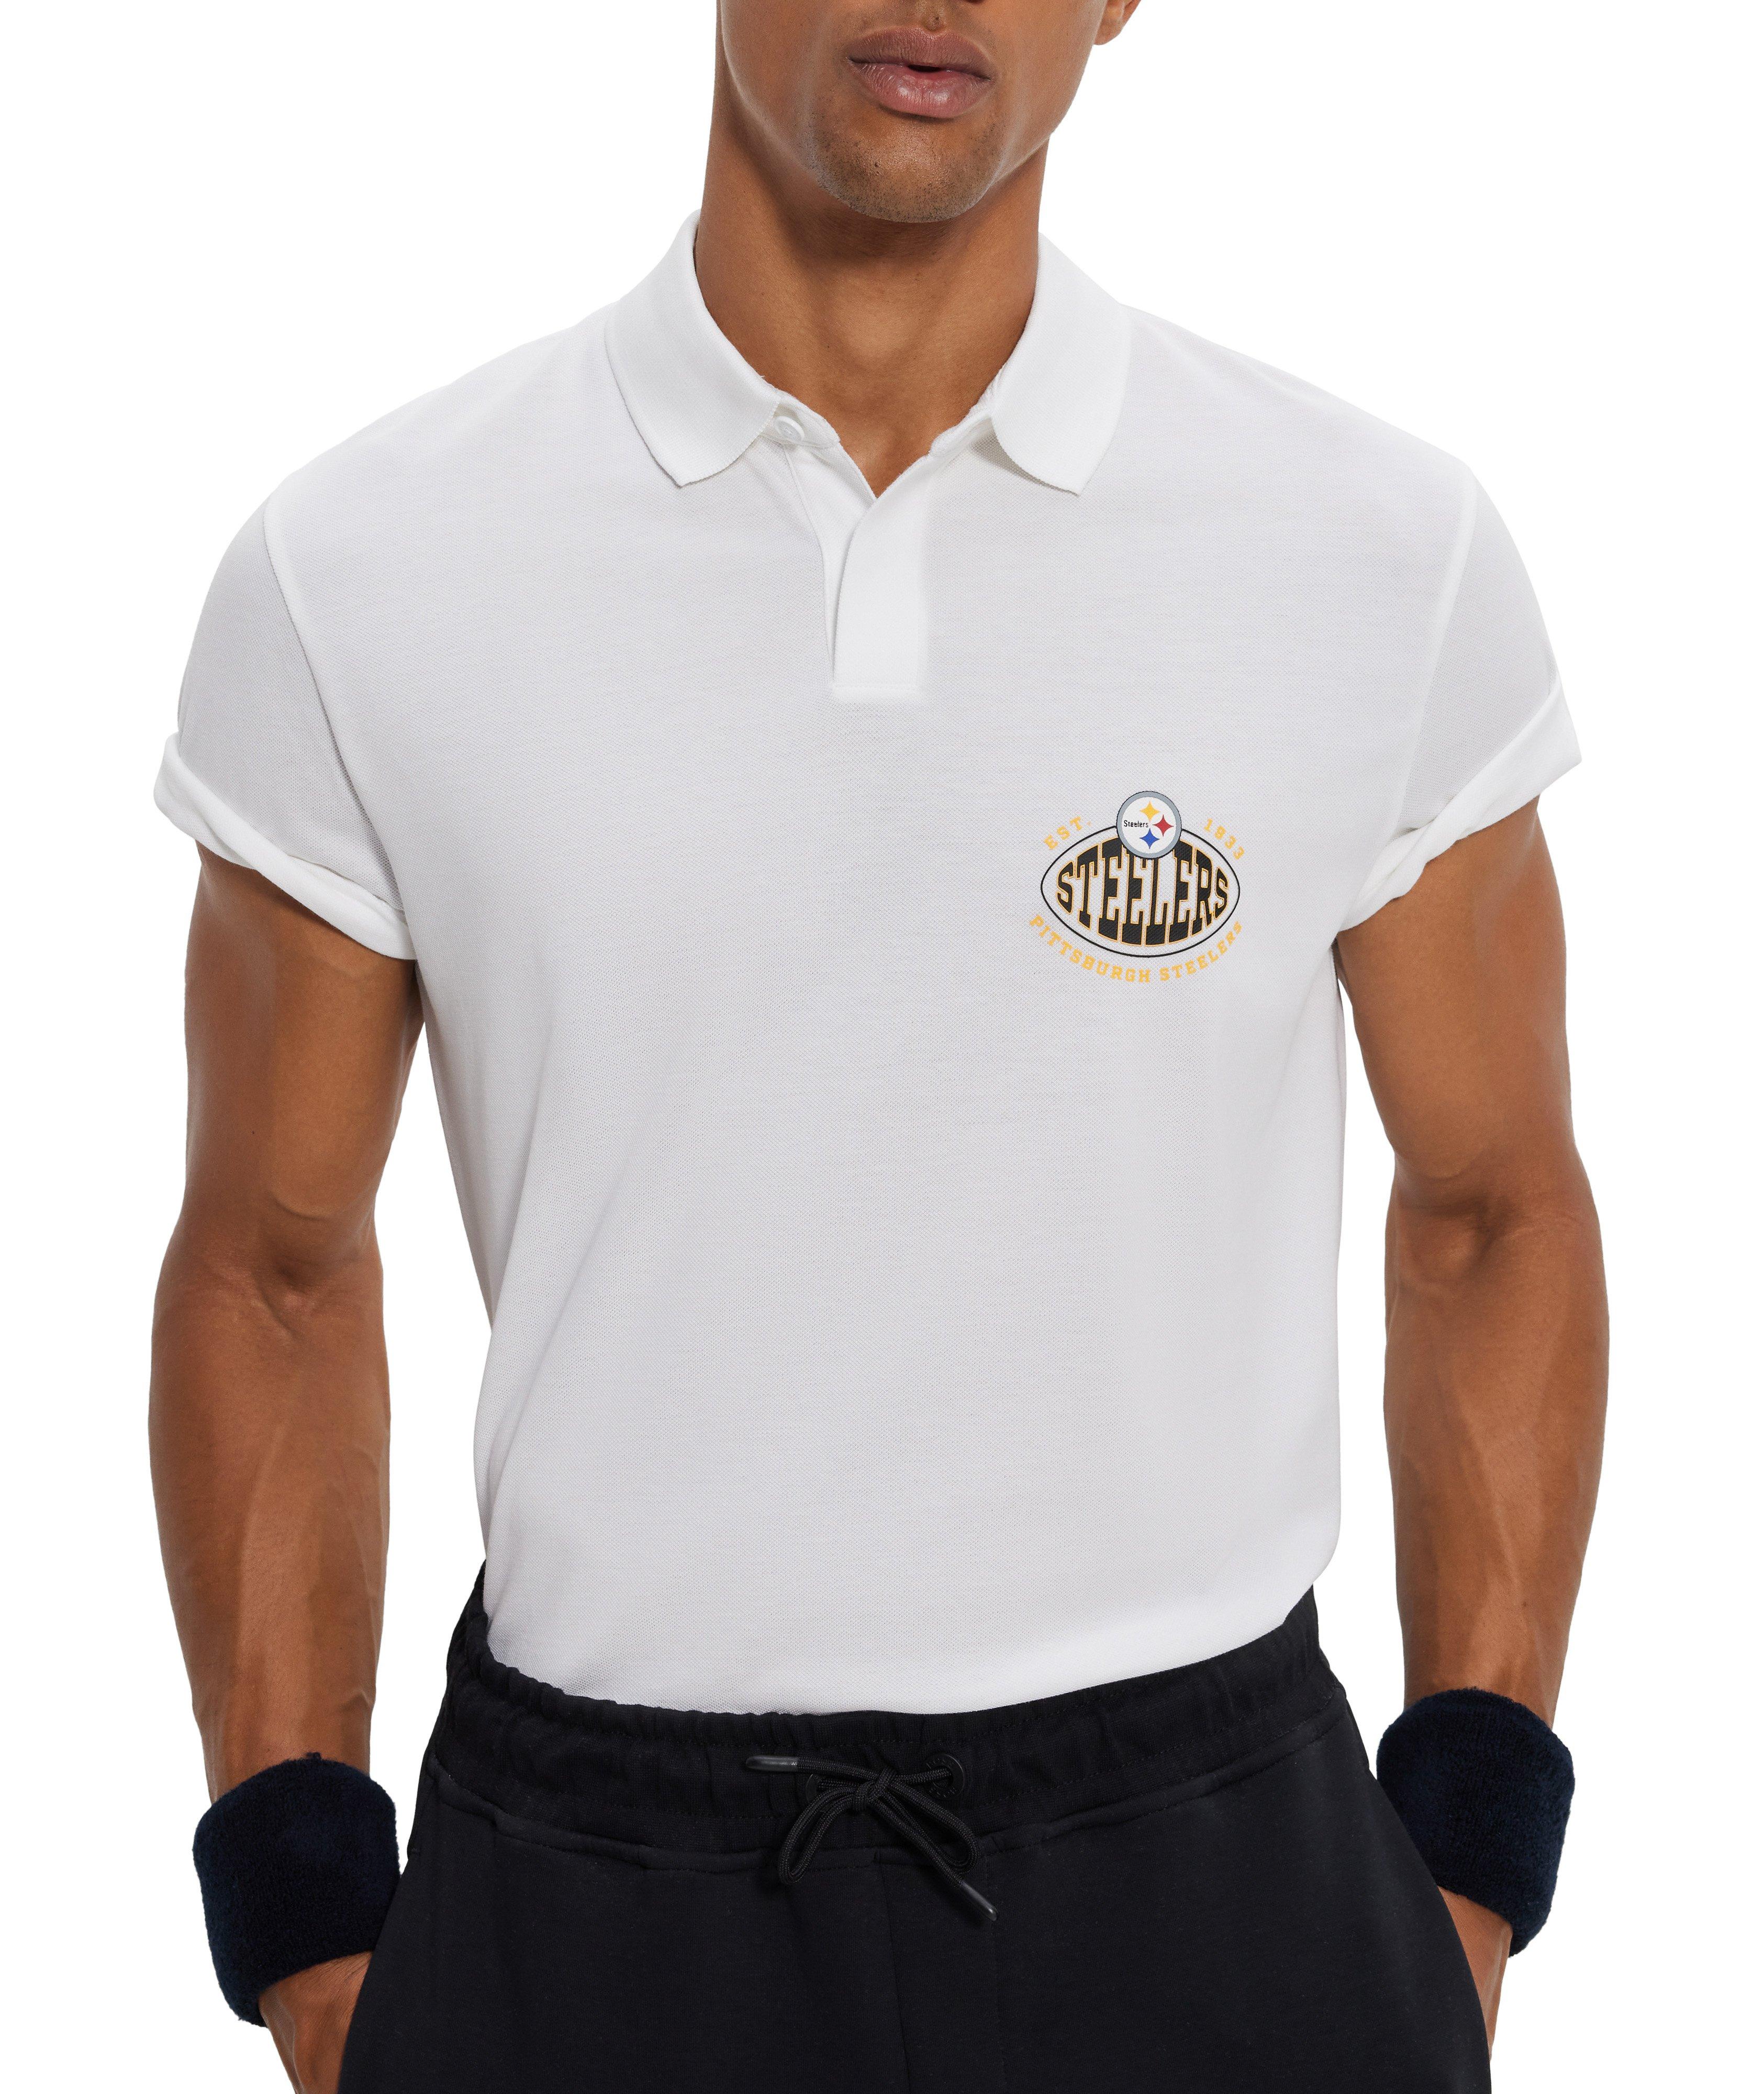 NFL Collection Pittsburgh Steelers Polo image 3